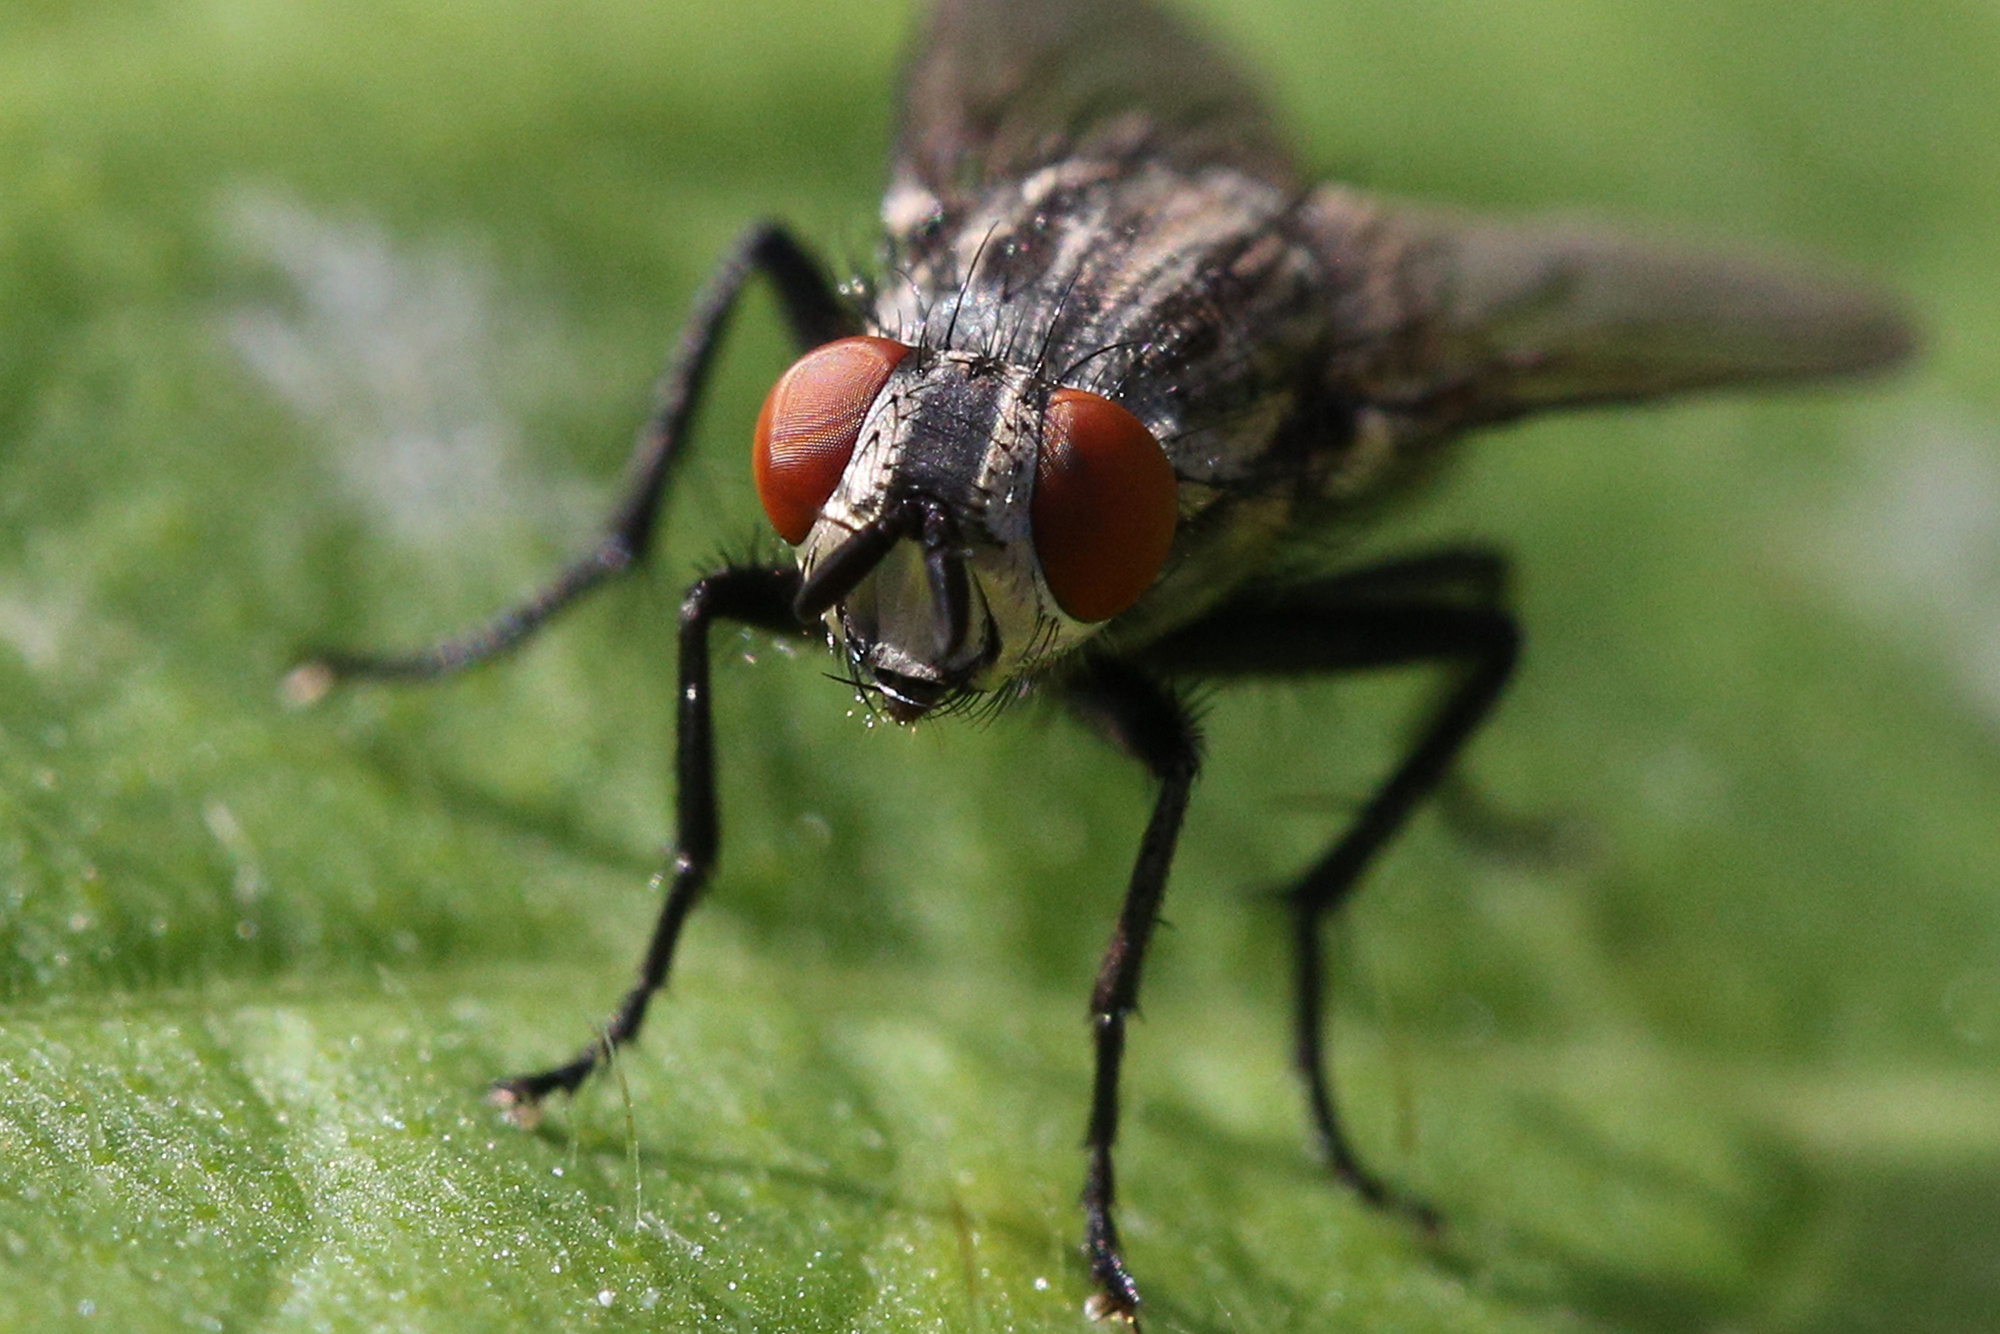 A close-up image of a house fly resting on a leaf outside, showcasing pest control services by Pest Me Off